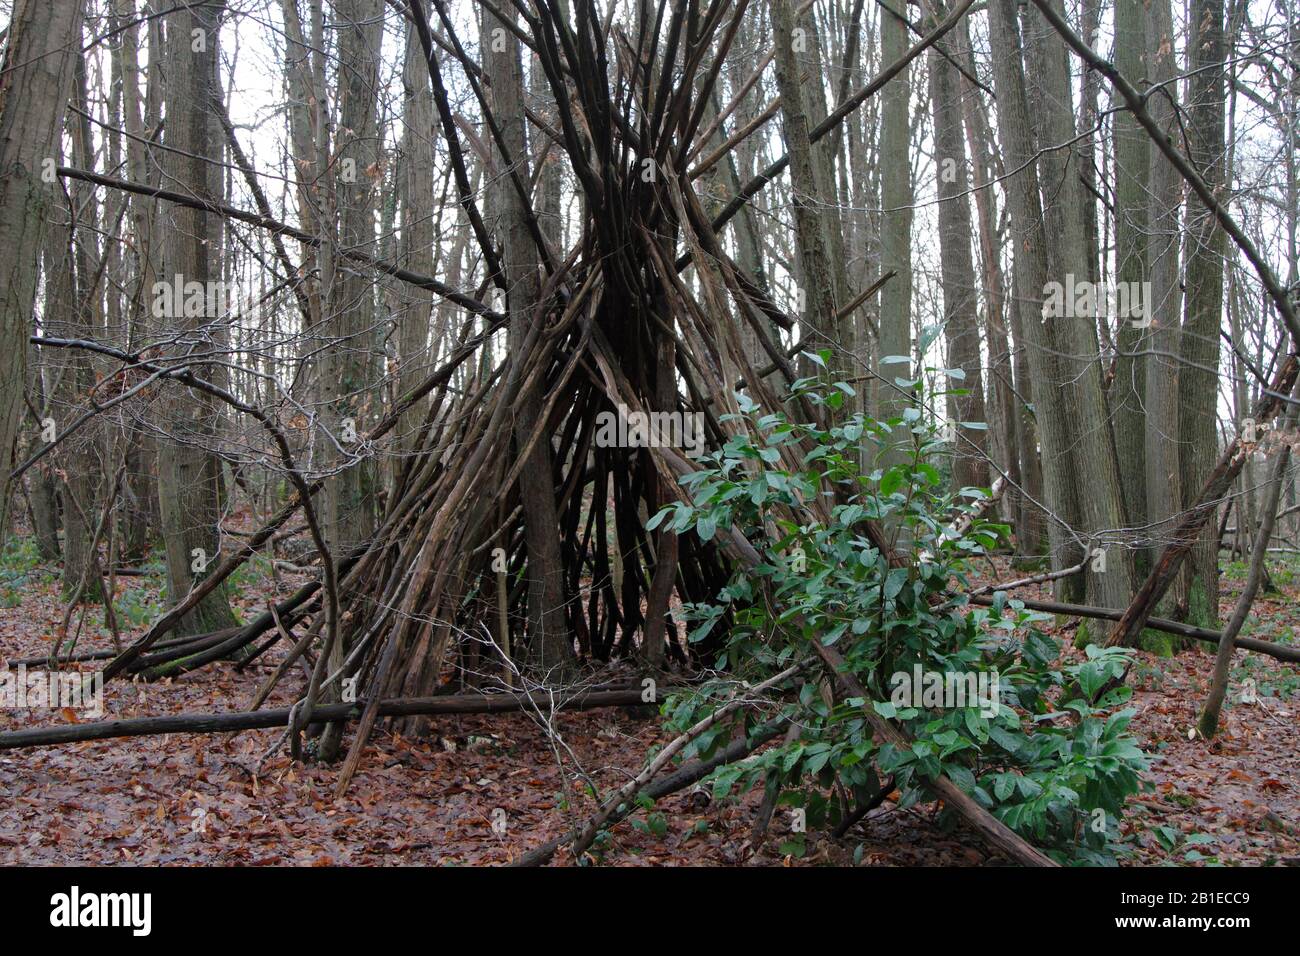 Shelter made with branches in the forest of Fausses-Reposes in Ville-d'Avray, Hauts-de-Seine, Ile-de-France, France Stock Photo